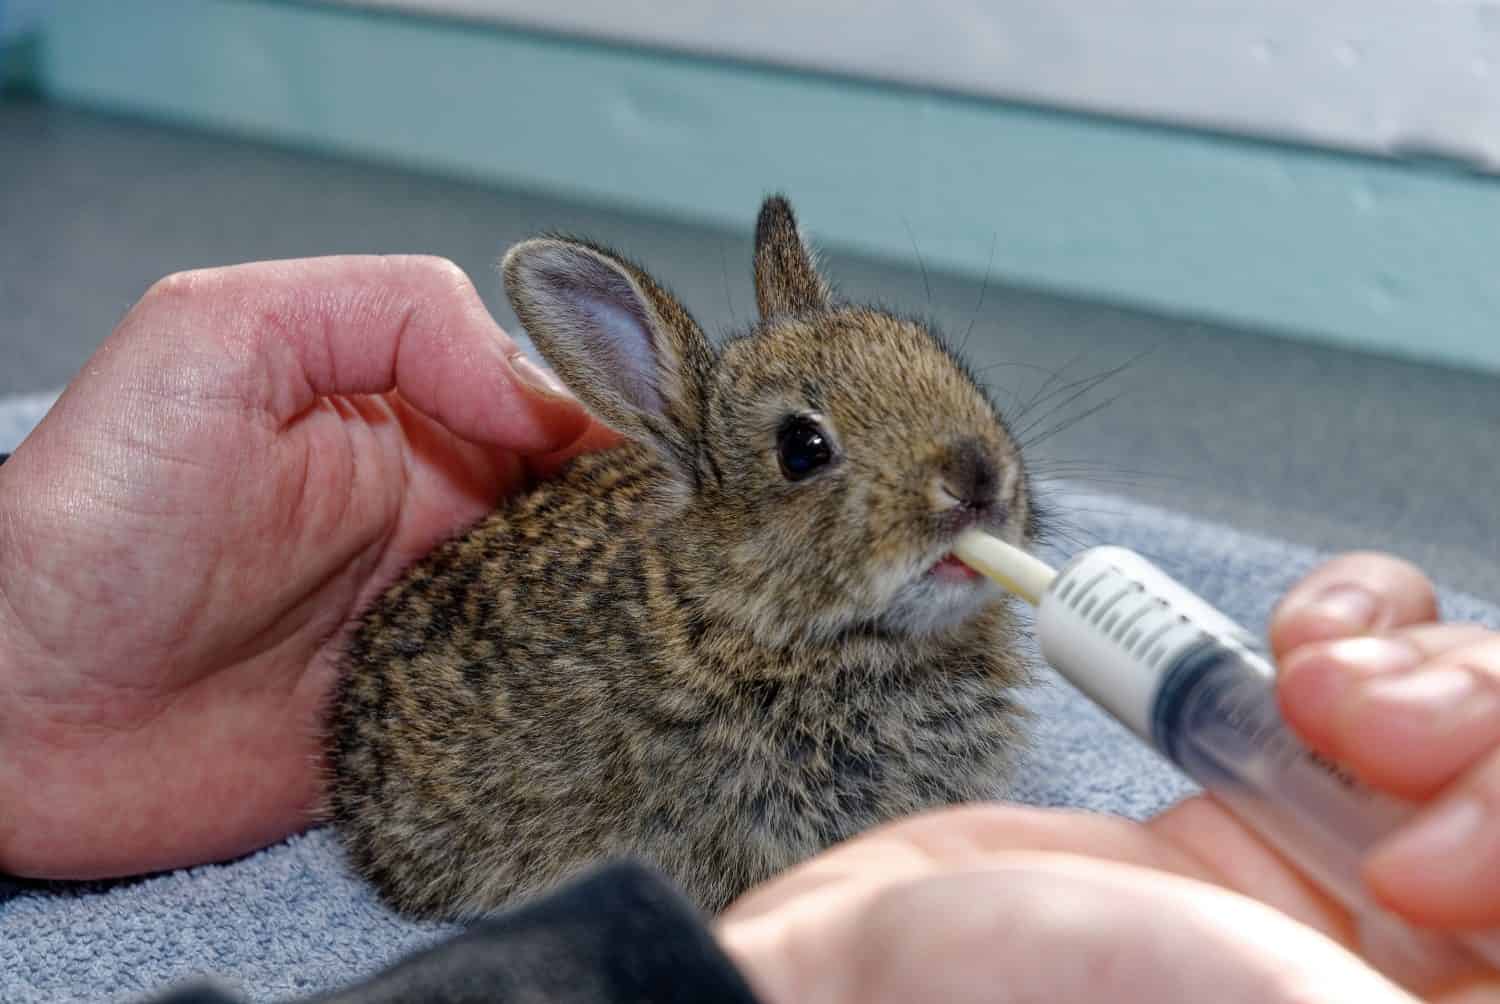 European Rabbit (Oryctolagus cuniculus) Kid in care at the wildlife rescue center.